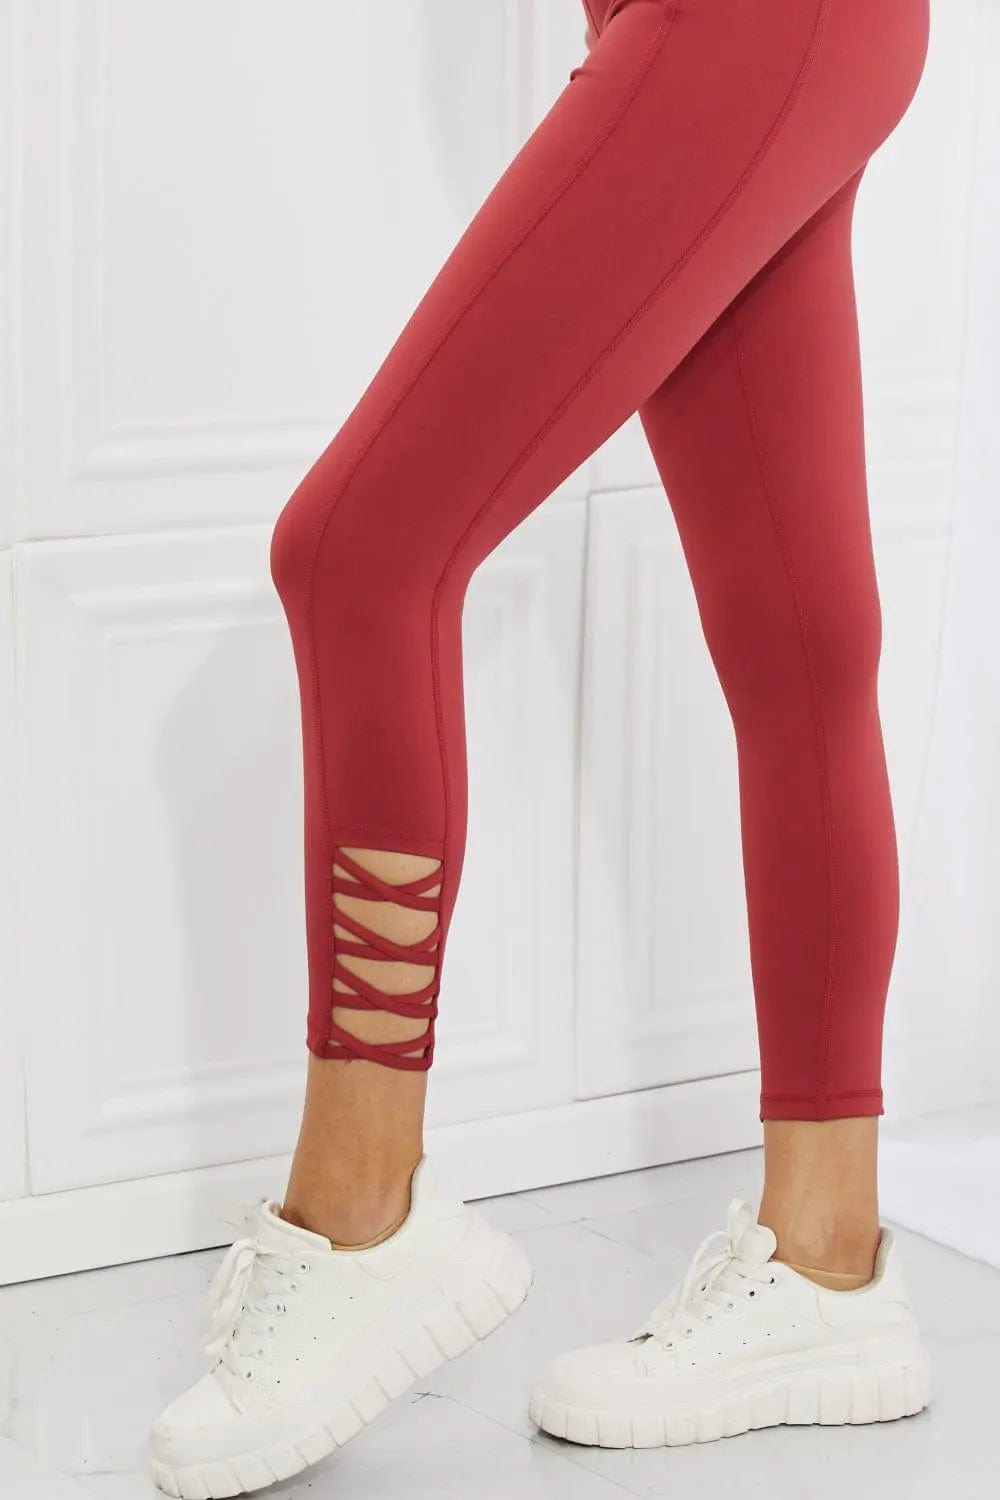 Yelete Ready For Action Full Size Ankle Cutout Active Leggings in Brick Red  31.00 MPGD Corp Merchandise